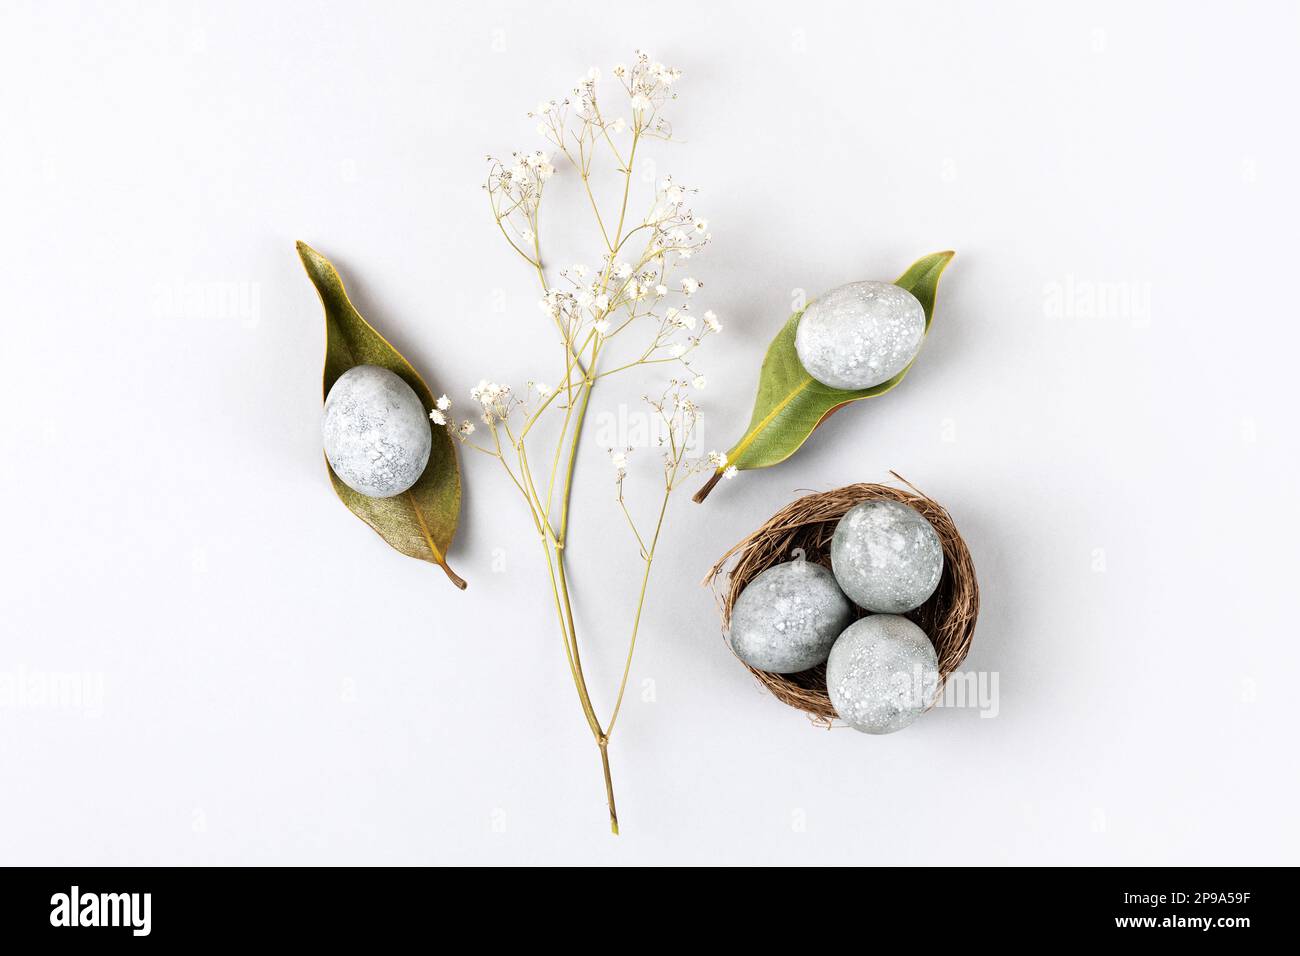 Minimal ecological Easter concept with dried flowers. Gray eggs on dry magnolia leaves and in a brown nest of twigs on a gray background Stock Photo